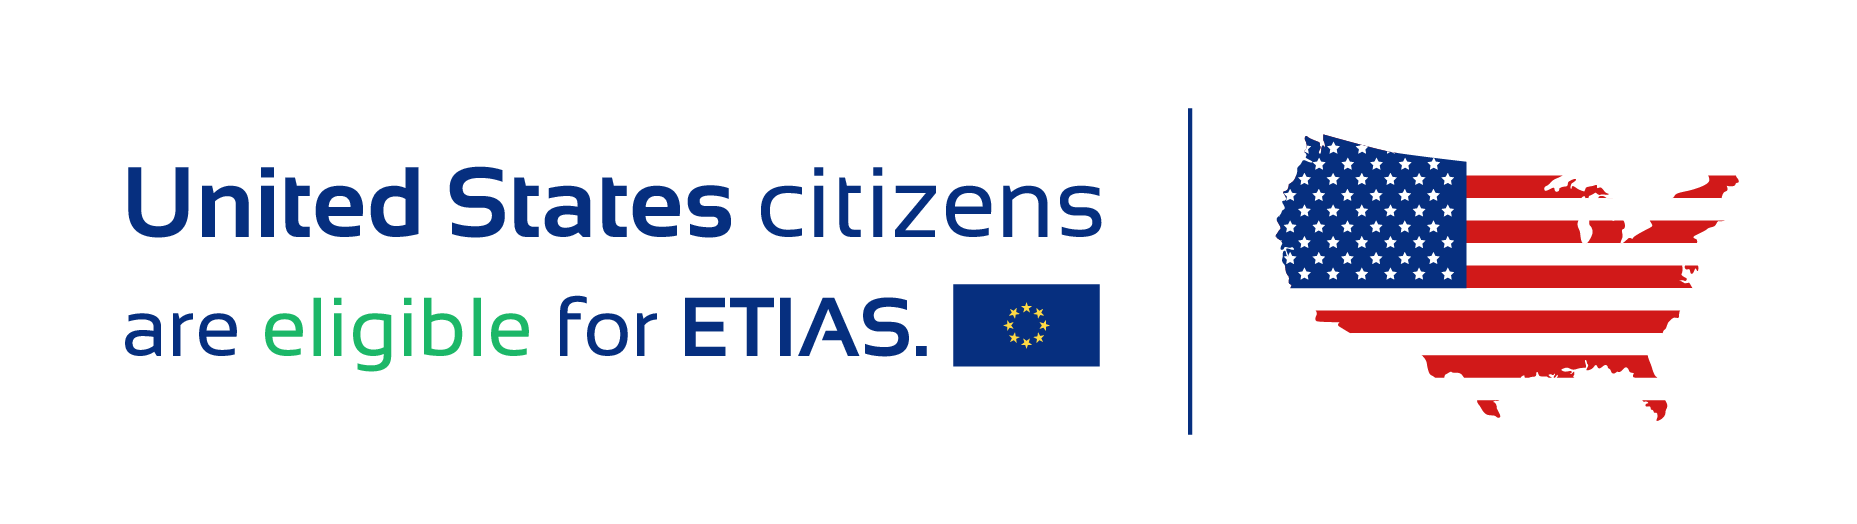 American citizens are eligible for ETIAS